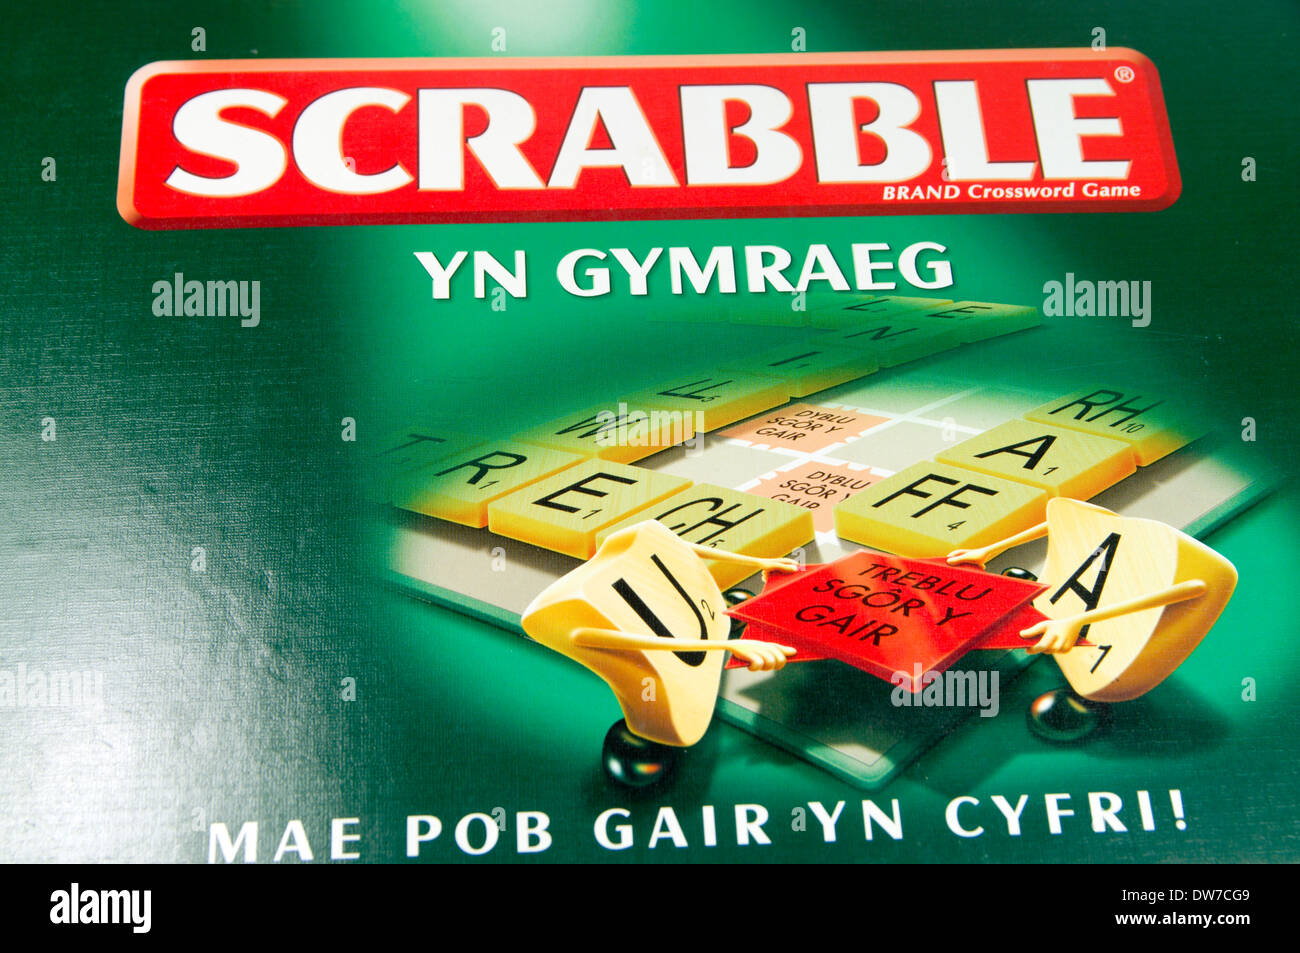 Welsh language version of Scrabble board game. Stock Photo